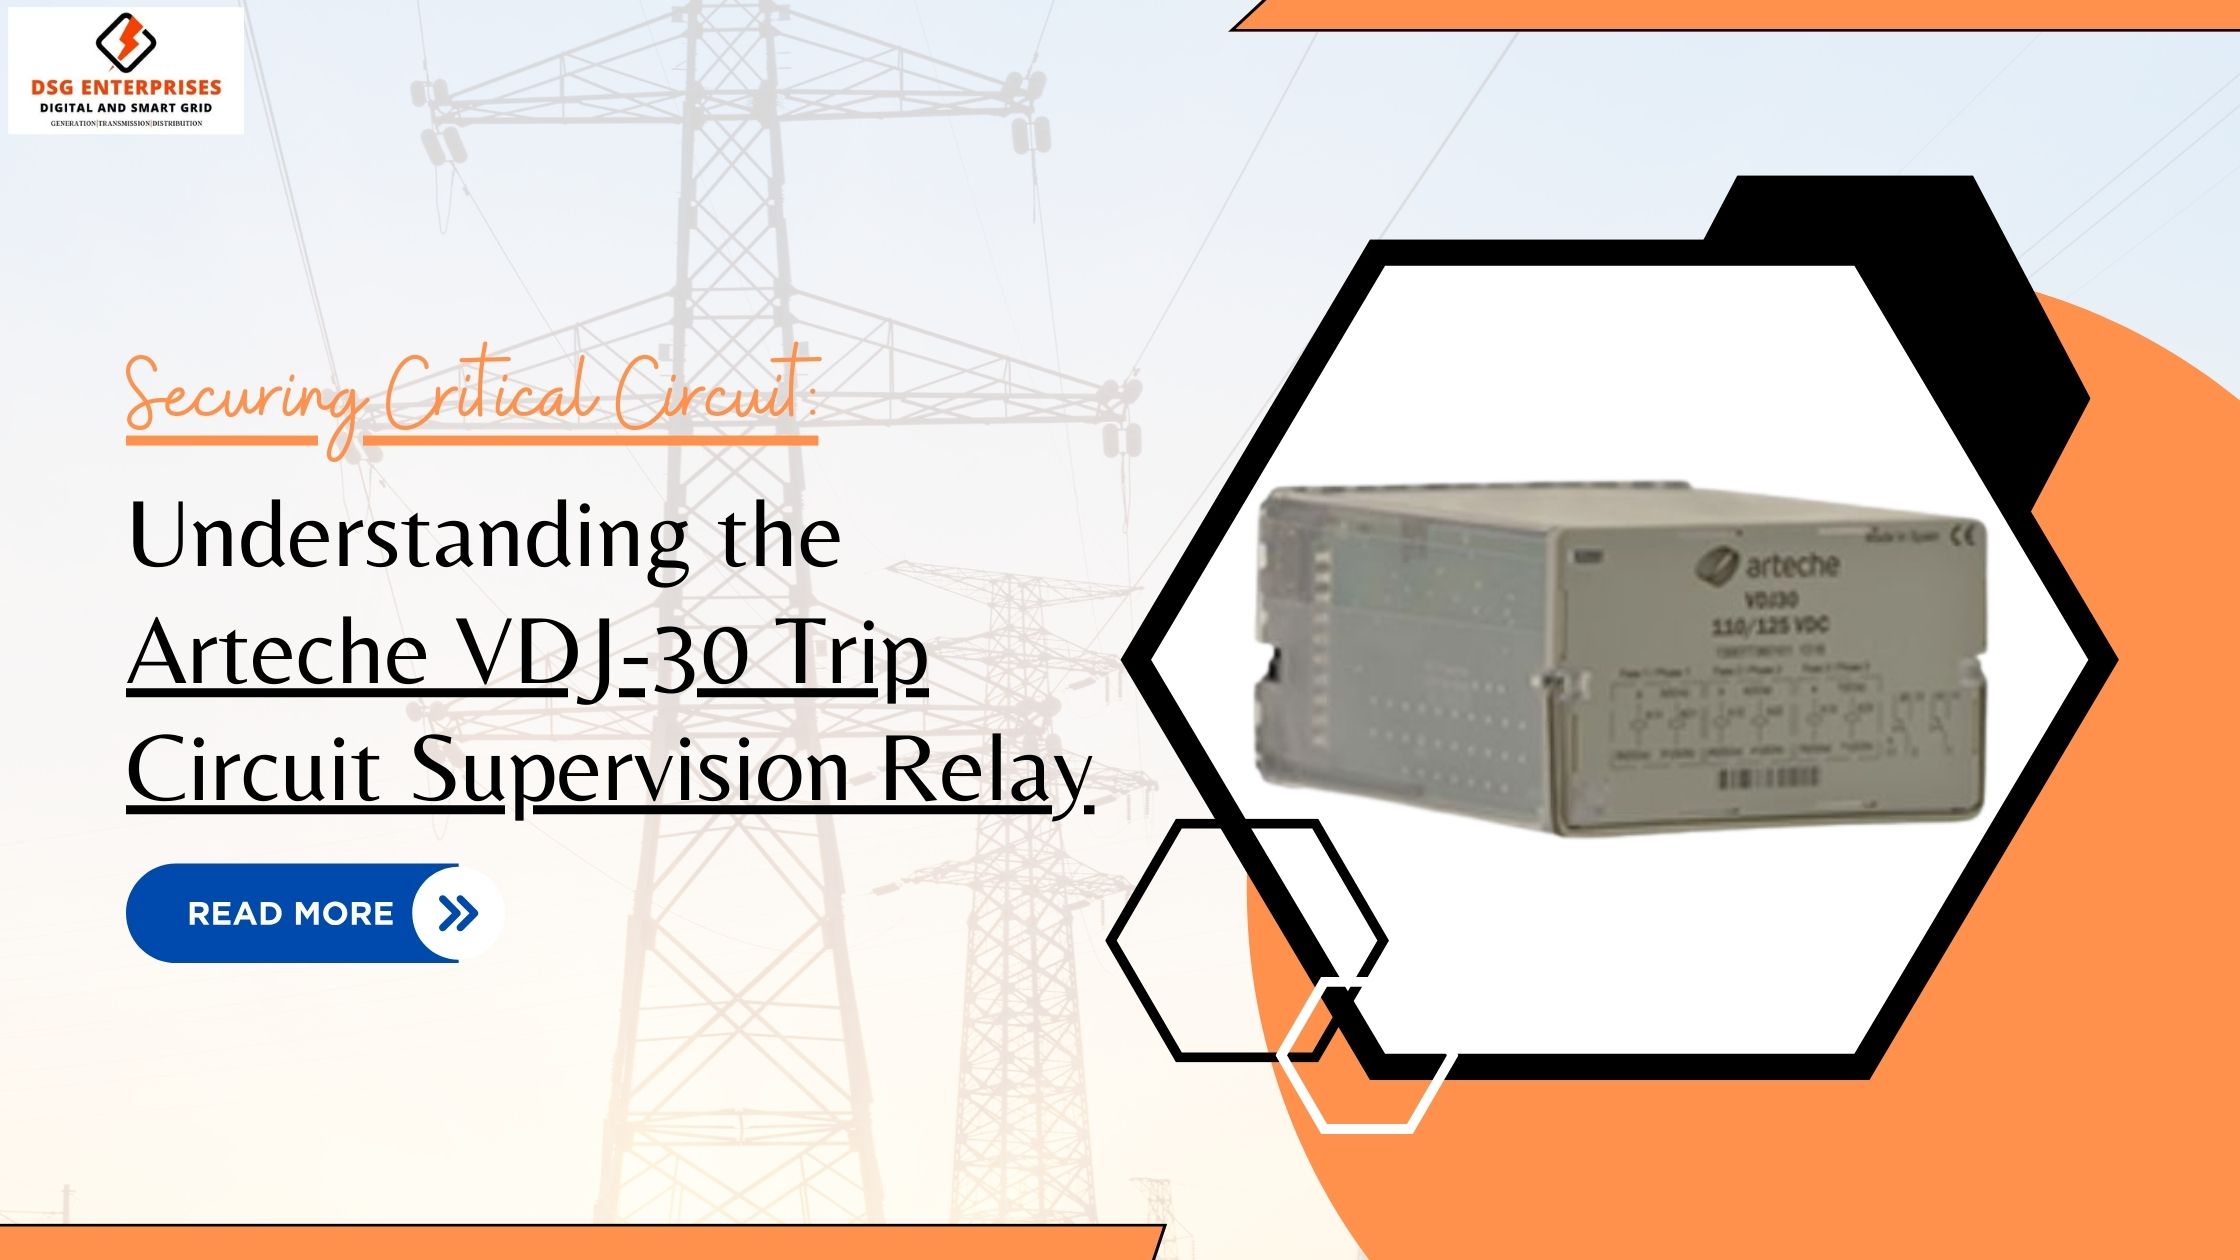 You are currently viewing Securing Critical Circuits: Understanding the Arteche VDJ-30 Trip Circuit Supervision Relay